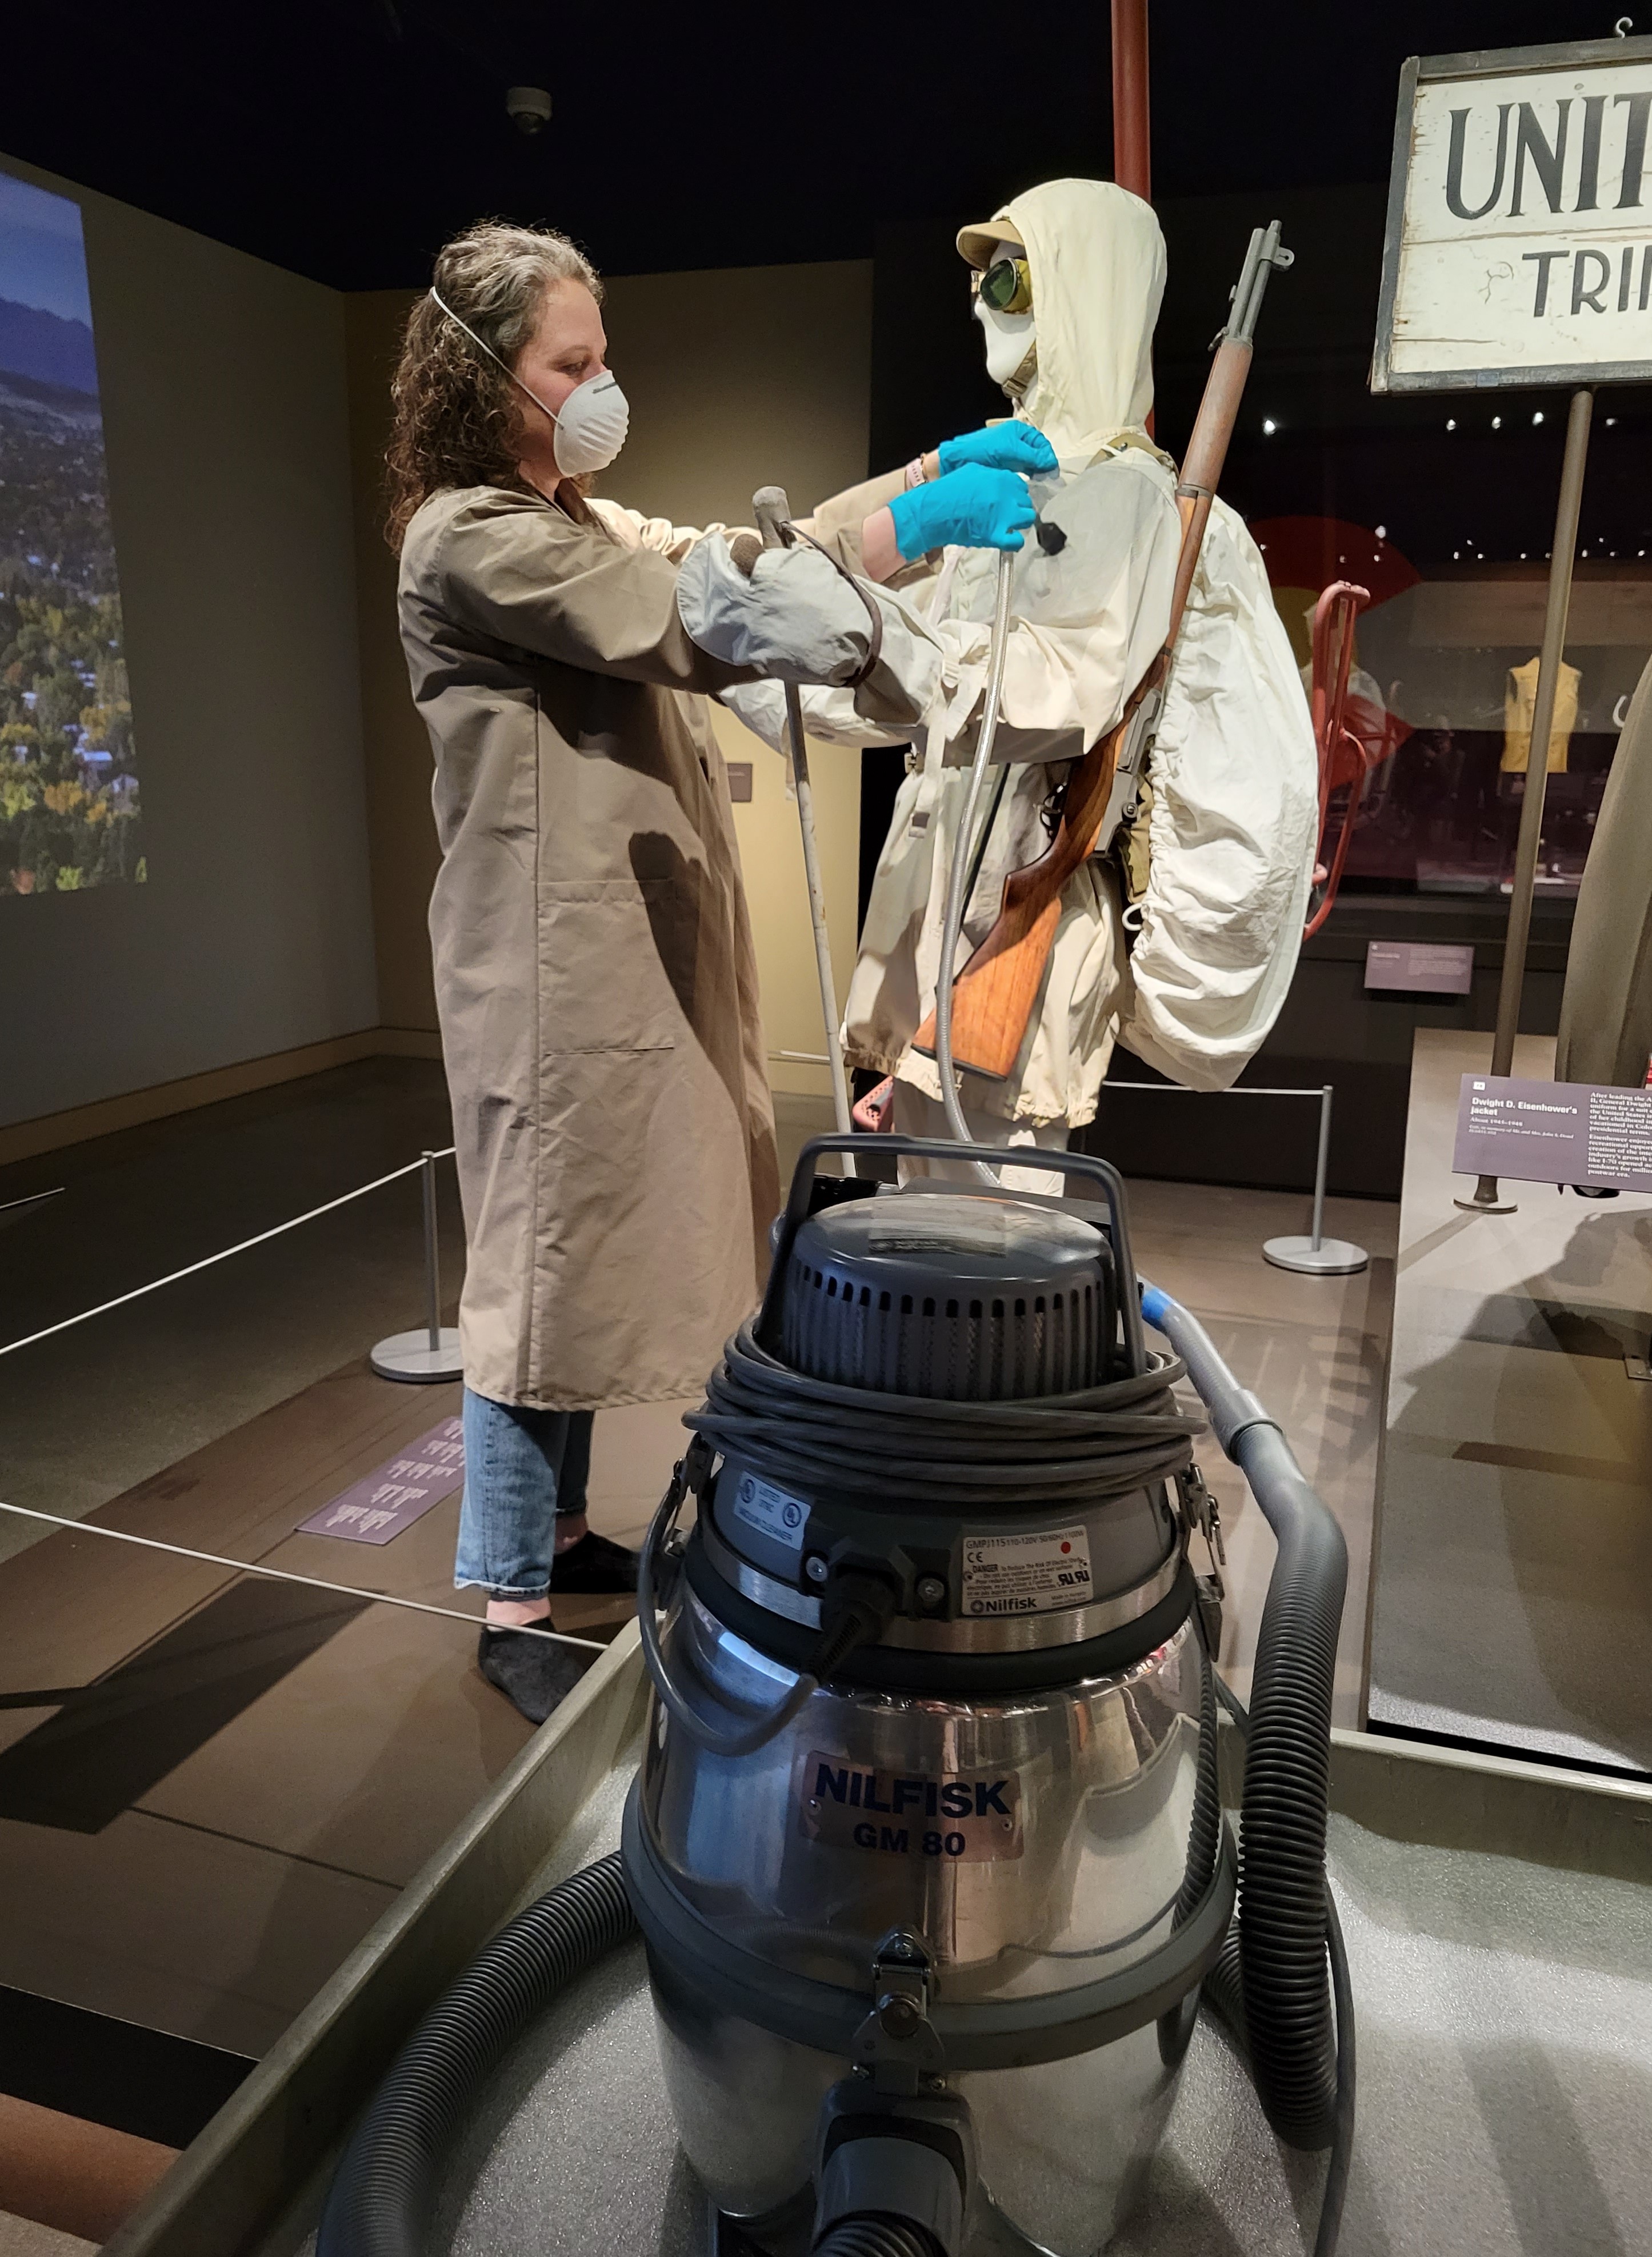 Photo of a museum staff member carefully vacuuming the textiles worn by a mannequin in one of the exhibits. The staff member is dressed in a long tan-colored coat with long sleeves, and they are wearing a white respirator mask over their nose and mouth. They use blue nitril gloves as they carefully handle the textile artifacts. In the foreground, the stainless steel vacuum is visible, its long hose reaching across to the mannequin that is dressed in a white 10th Mountain Division ski suit.